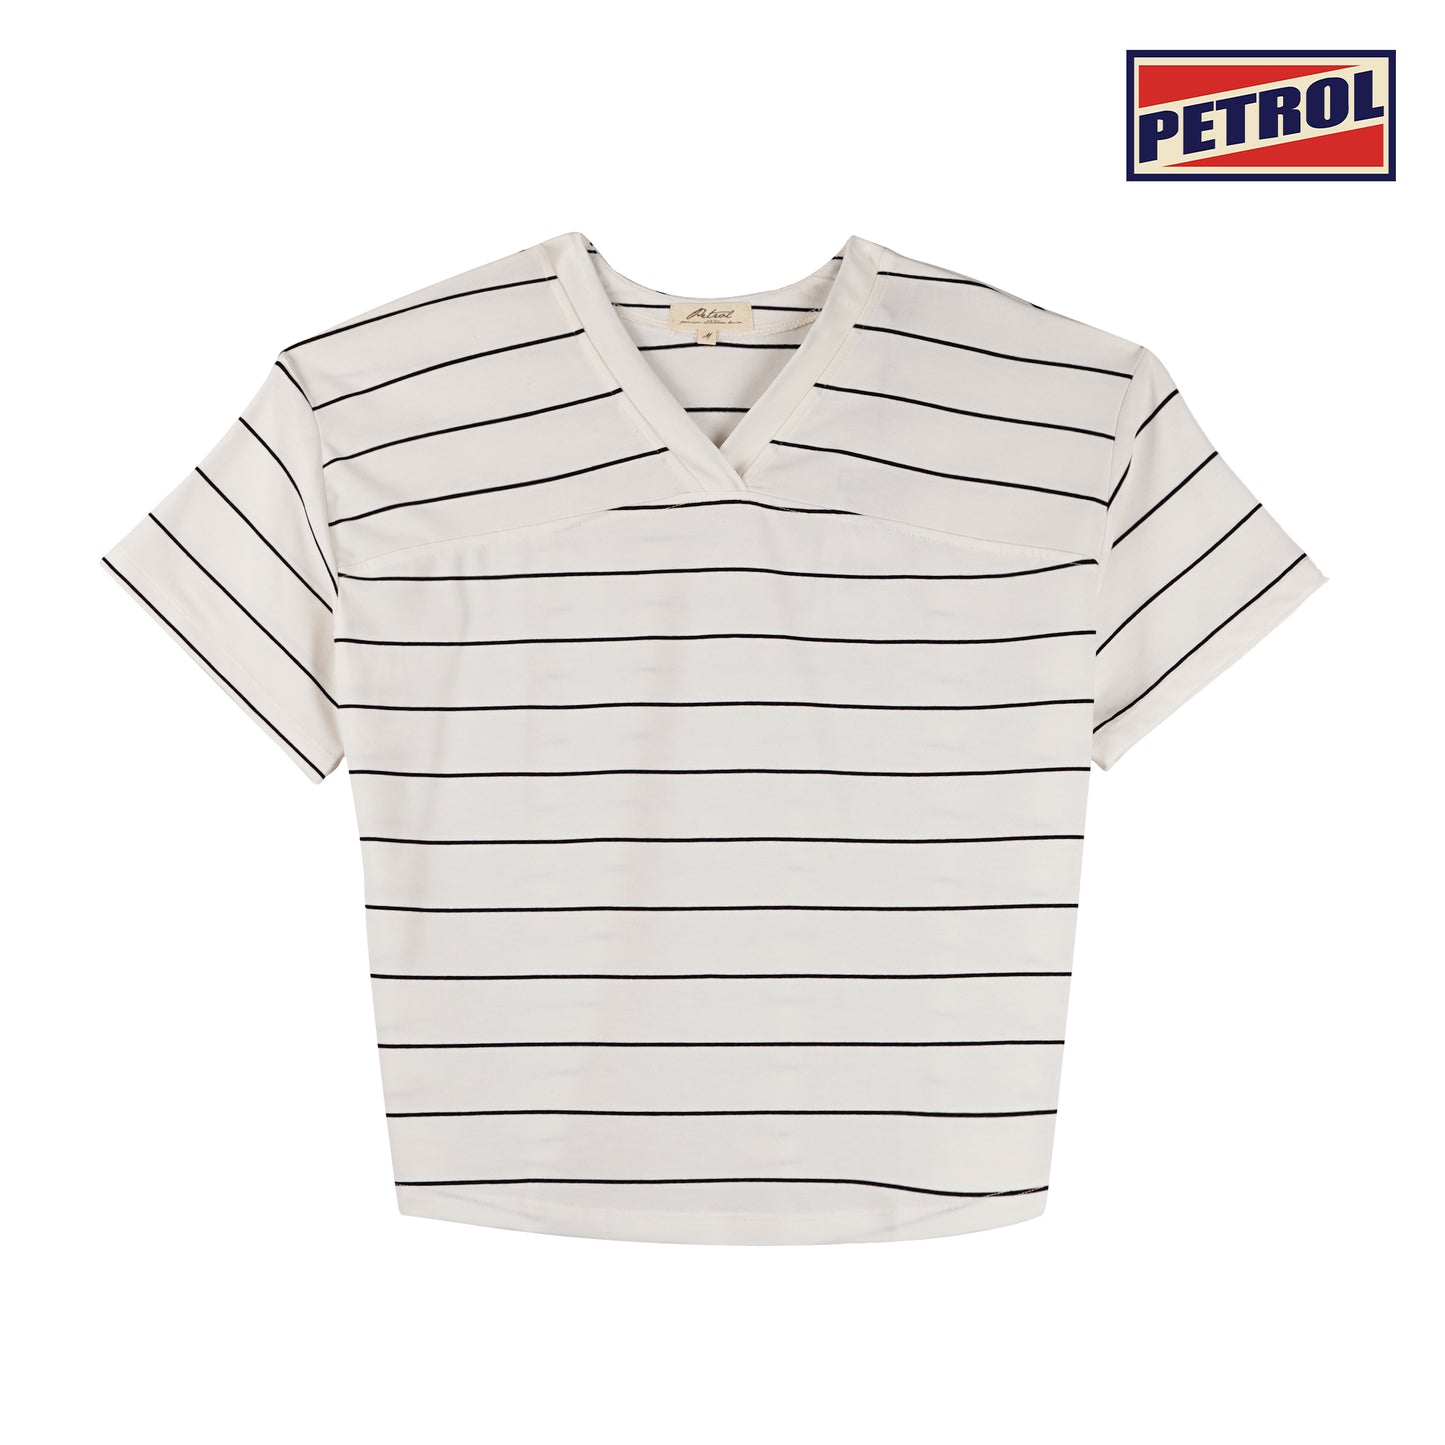 Petrol Basic Tees for Ladies Oversized Fitting Shirt Trendy fashion Casual Top for Ladies 140875-U (White)